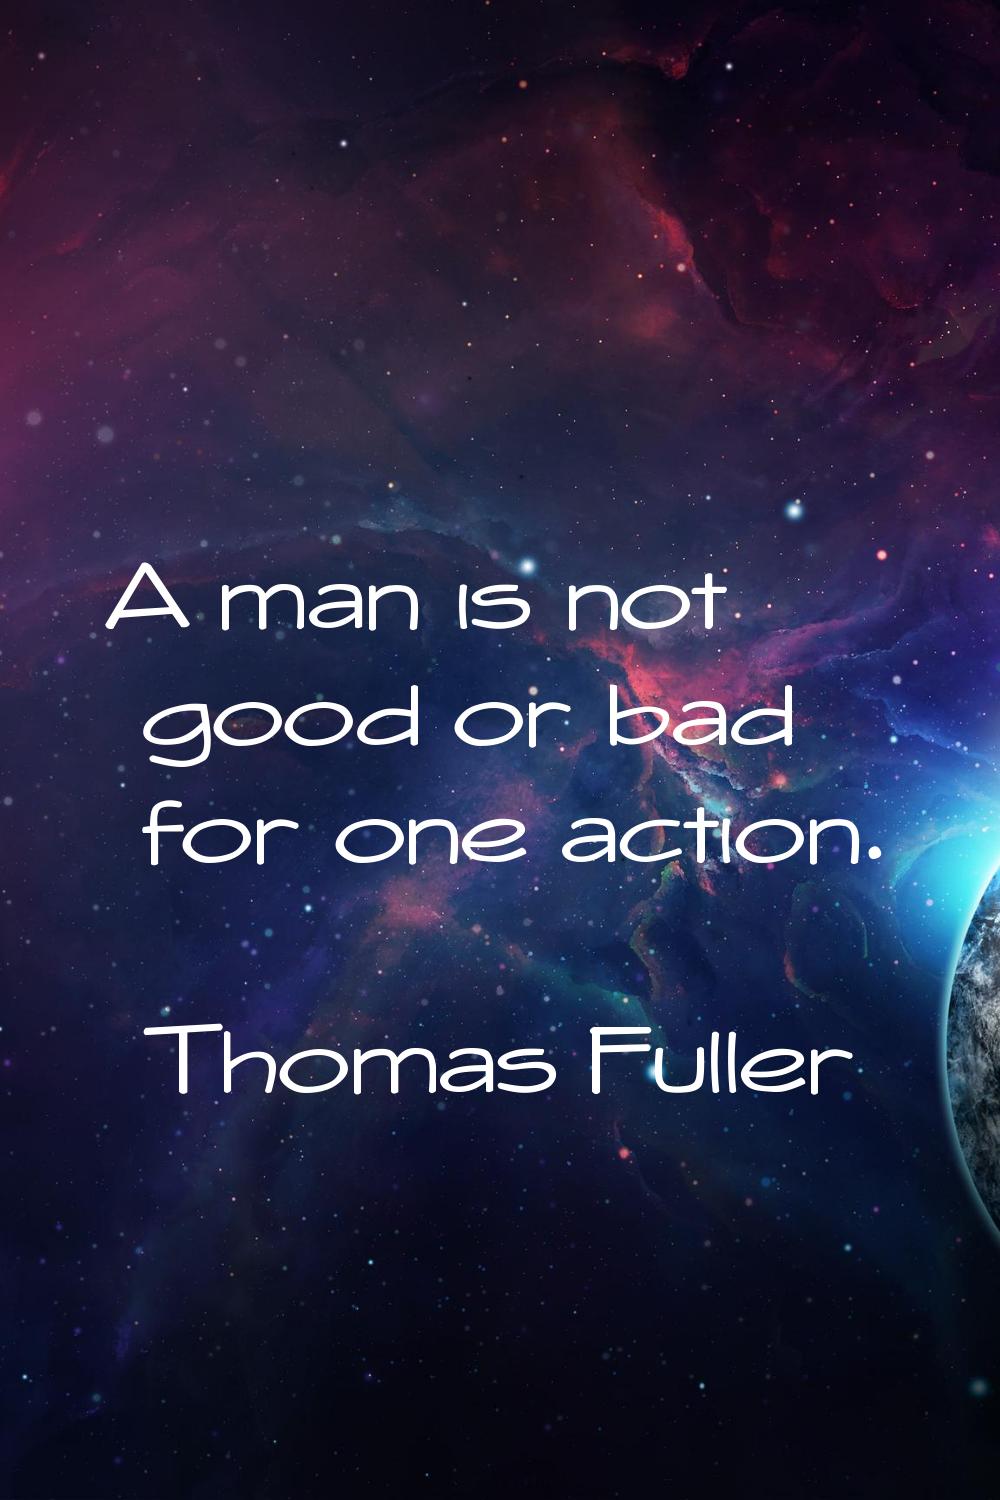 A man is not good or bad for one action.